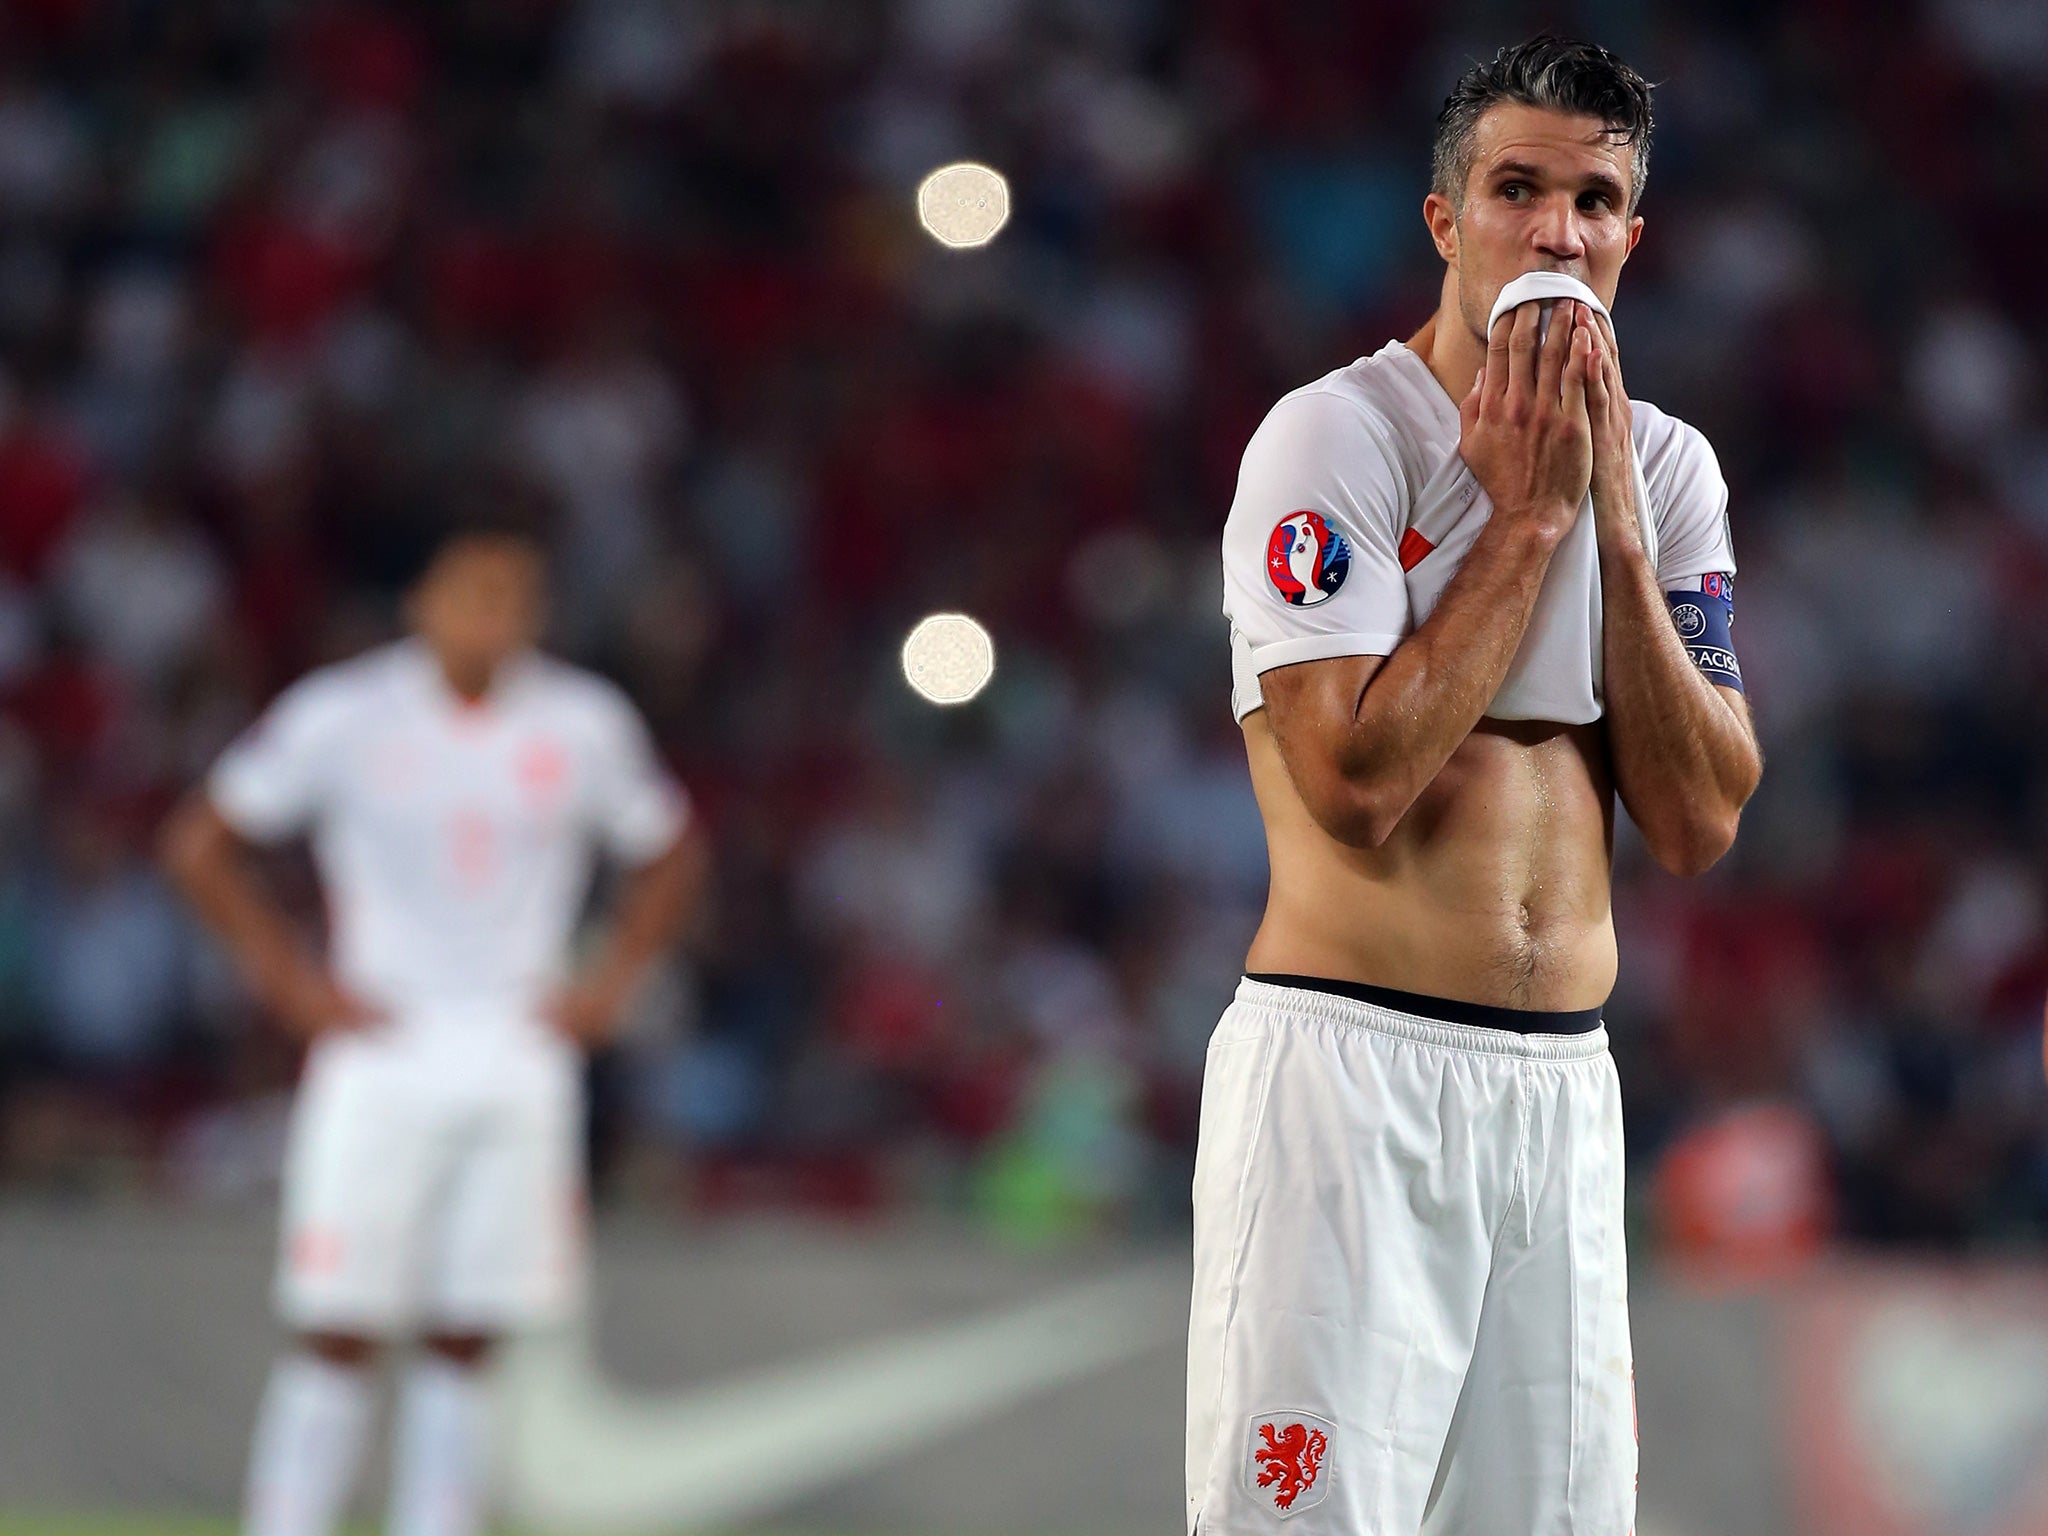 Robin van Persie, the Netherlands captain, looks forlorn at the end of their 3-0 defeat to Turkey